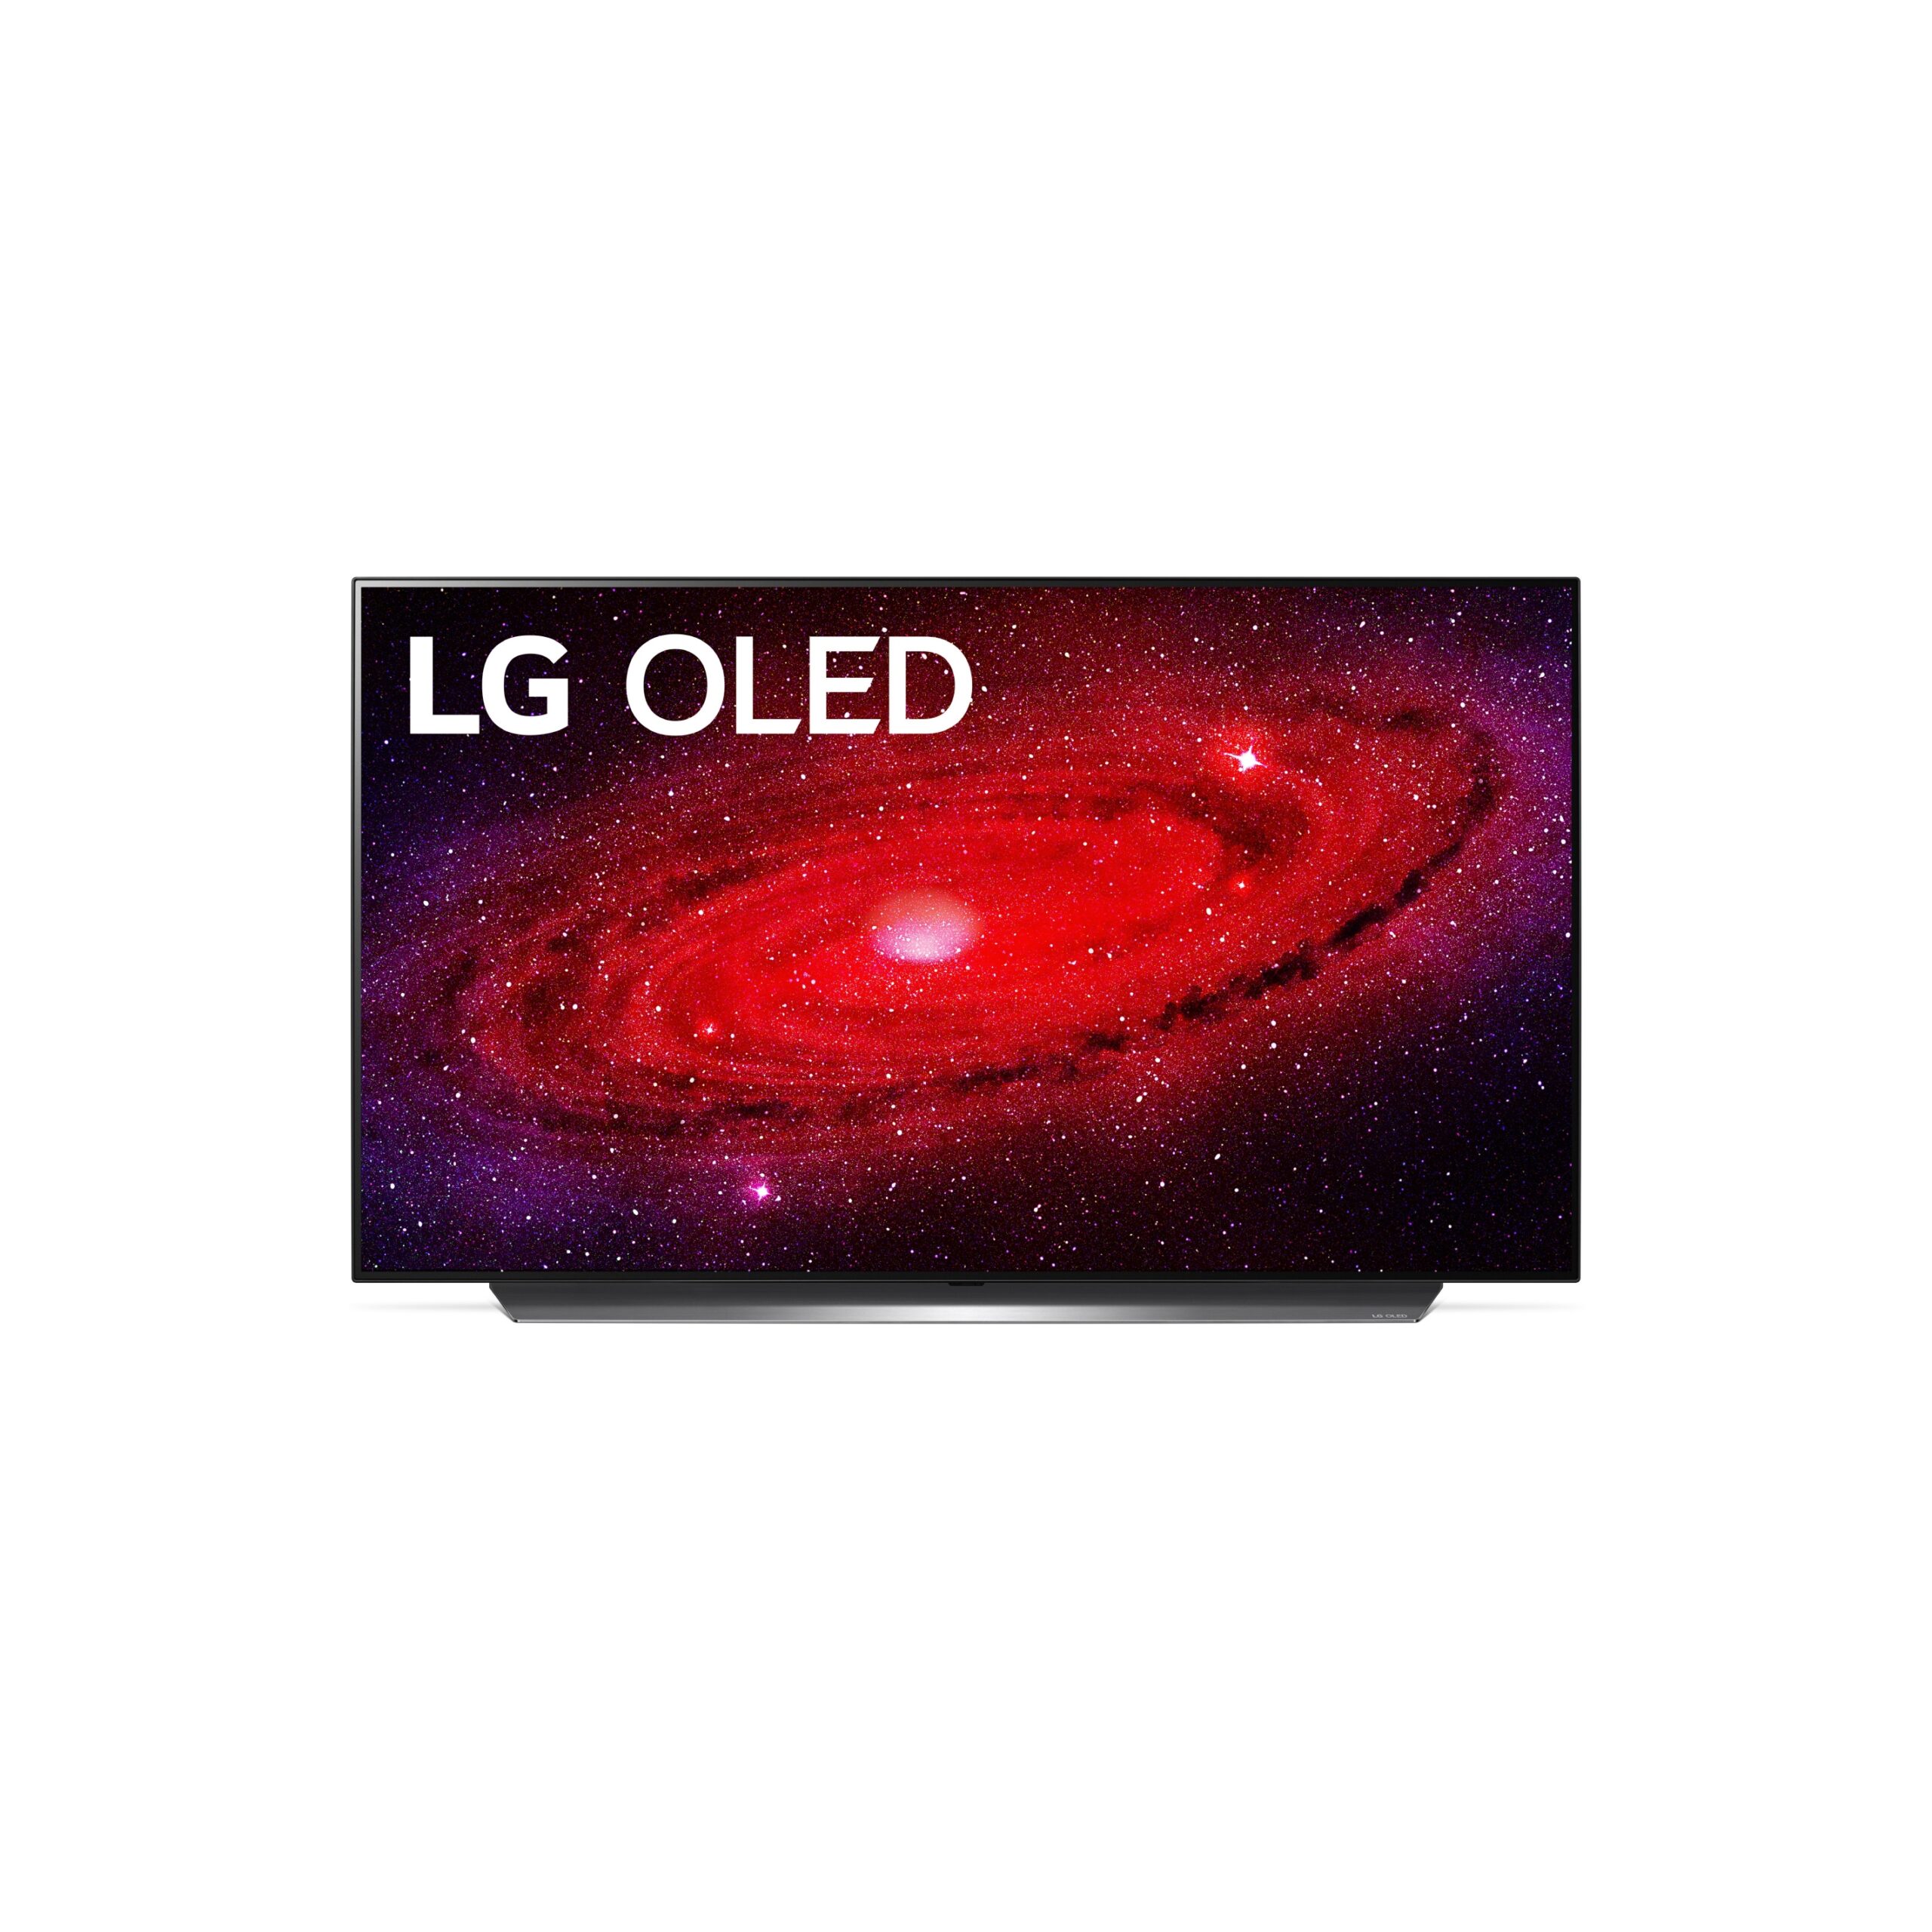 LG 48 inch OLED TV 00 scaled 1 LG Targets Gamers With New 48 Inch Size 4K OLED TV